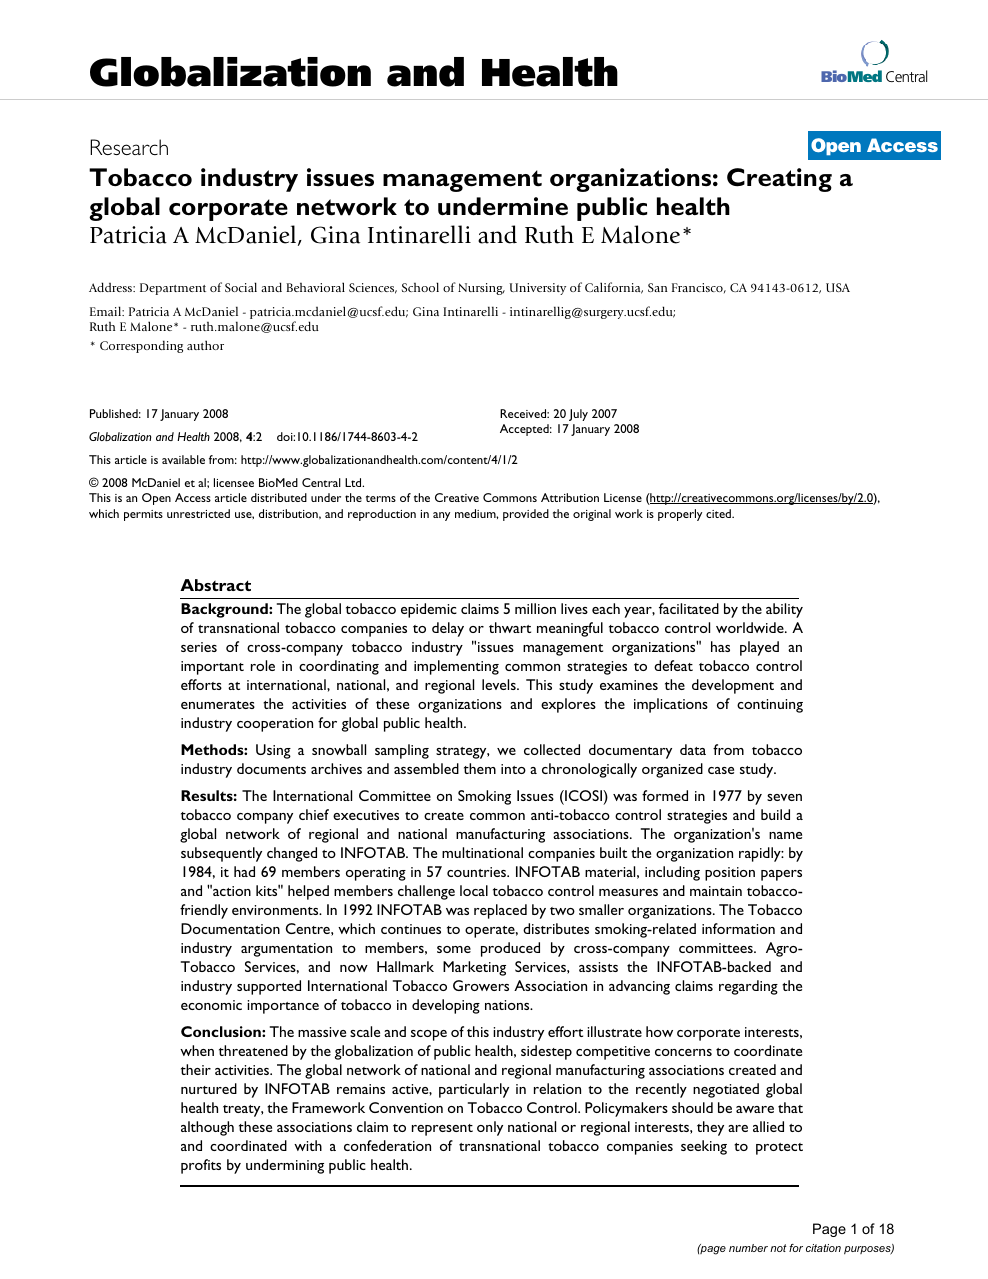 Tobacco Industry Issues Management Organizations Creating A Global Corporate Network To Undermine Public Health Topic Of Research Paper In Economics And Business Download Scholarly Article Pdf And Read For Free On